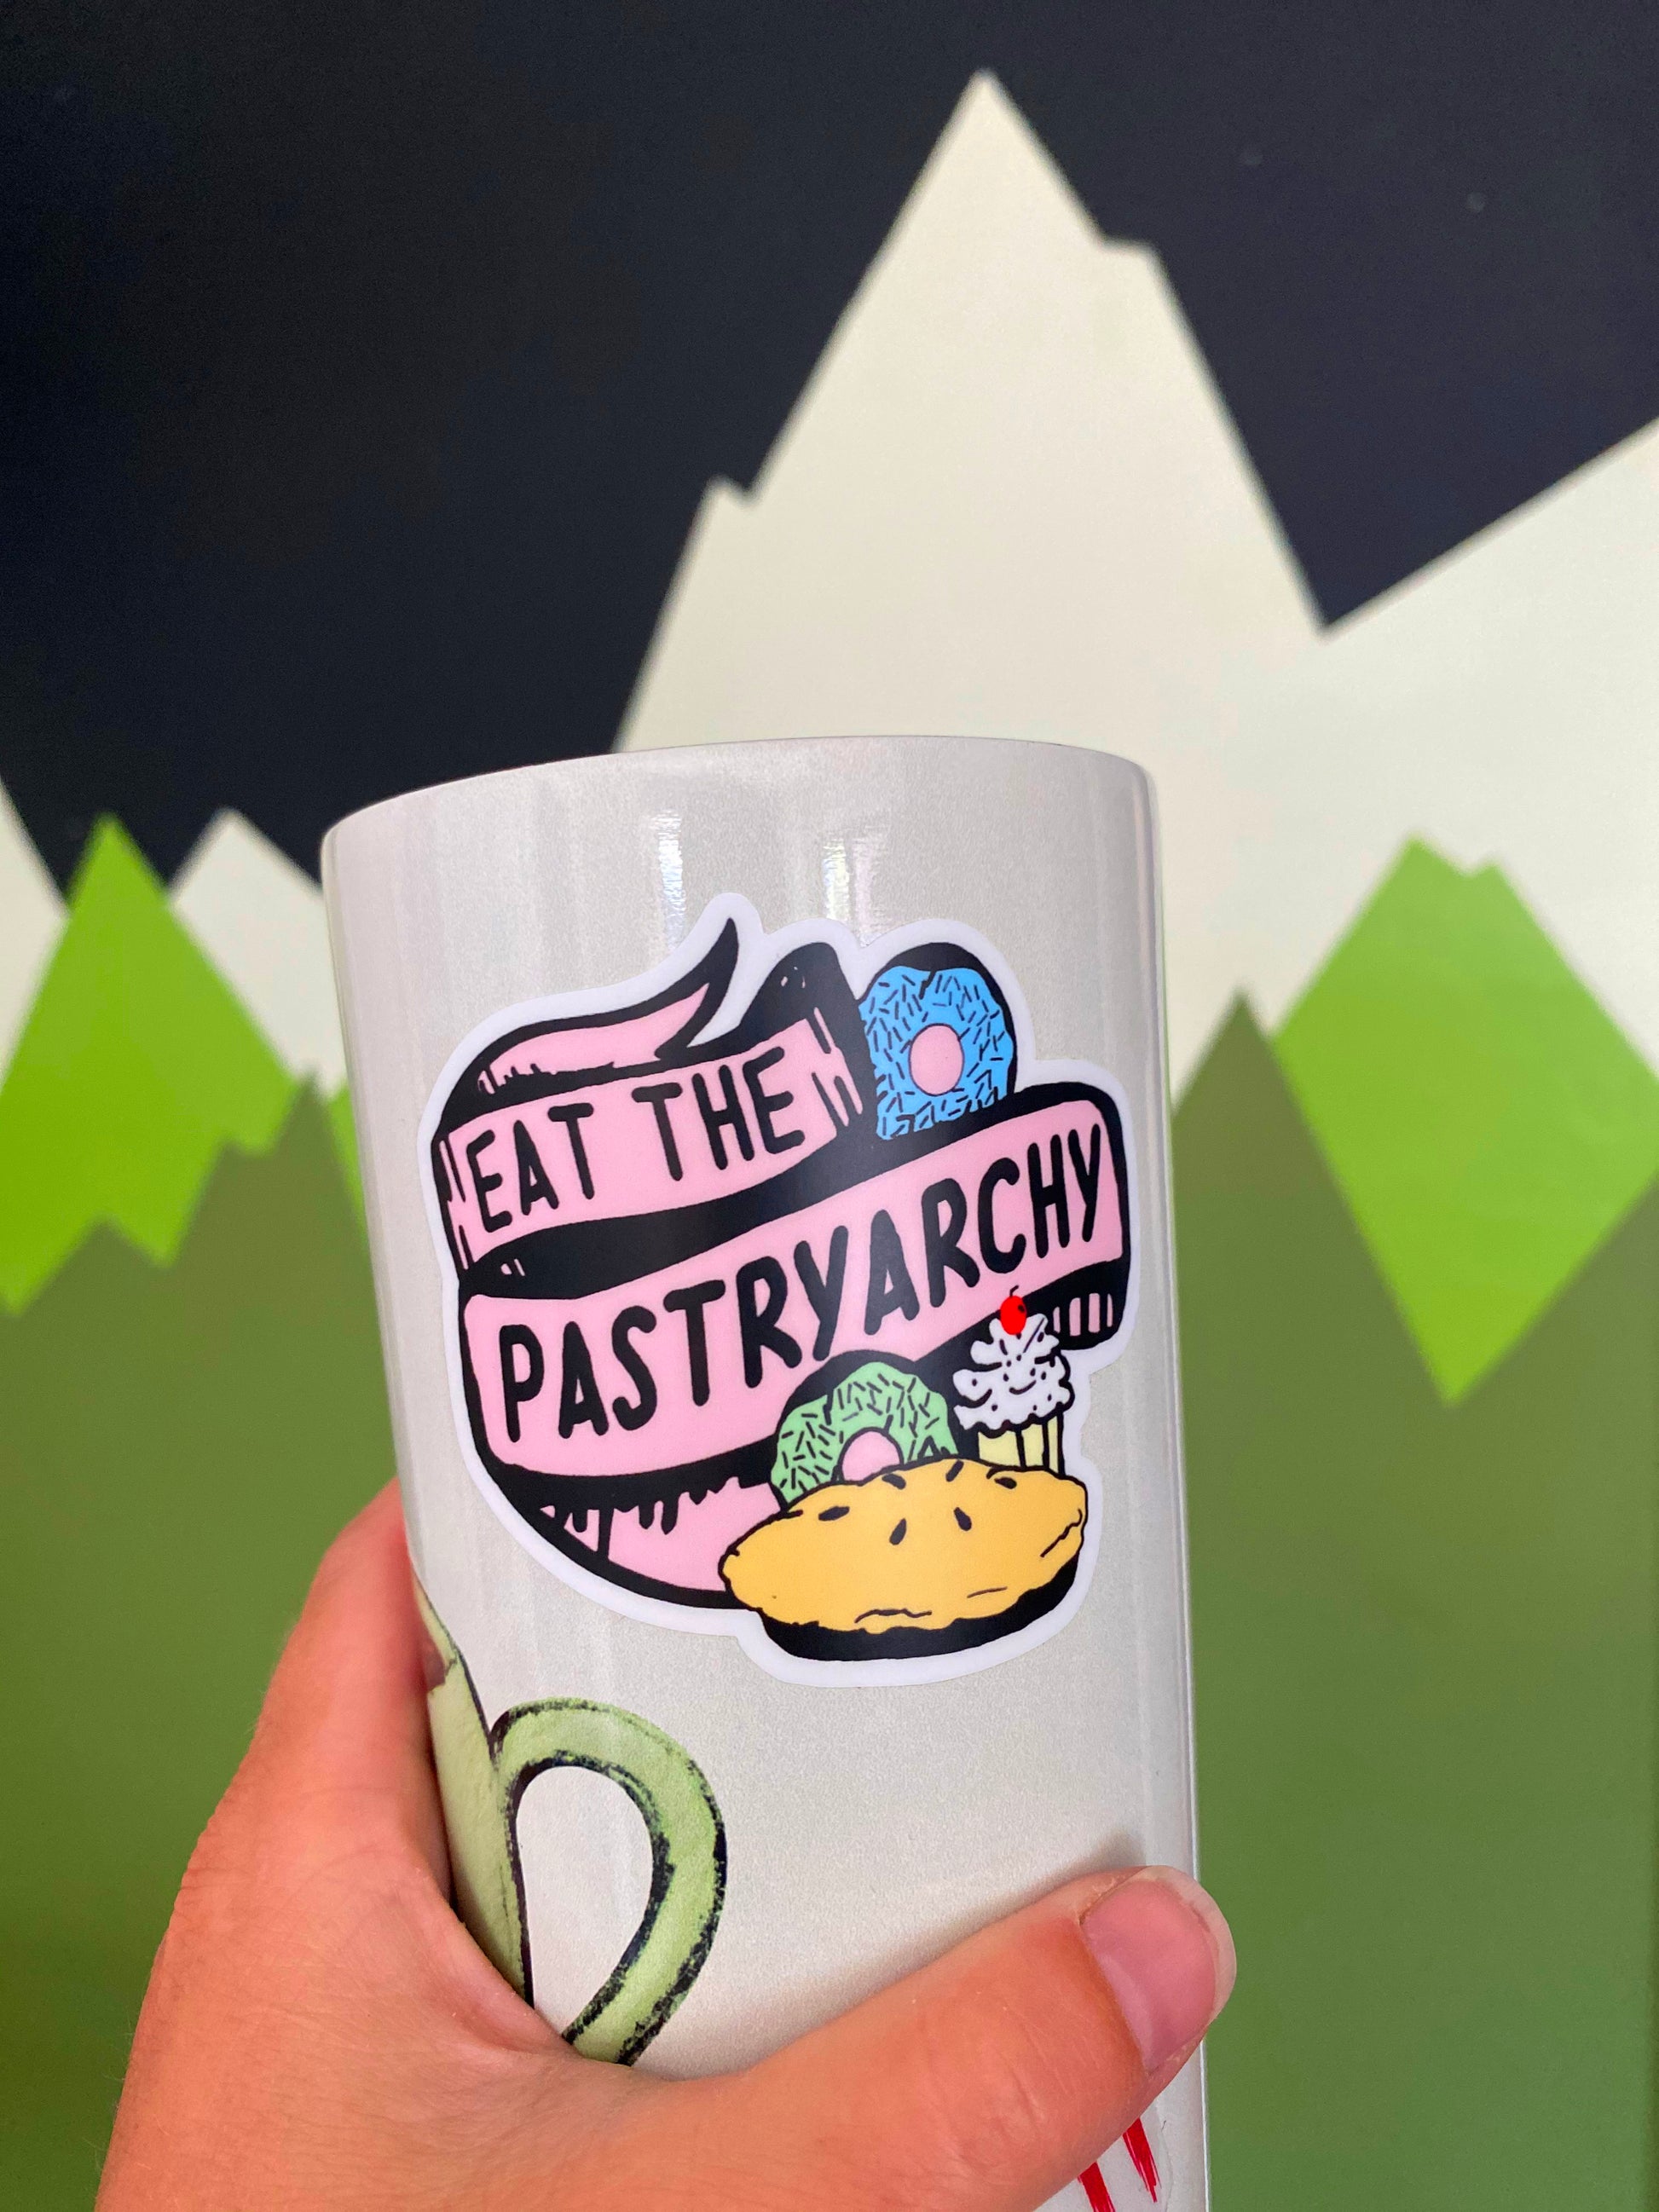 cute snarky sticker eat the pastryarchy patriarchy baked goods baking donuts pie cupcake feminism feminist coin laundry montana funny stickers decal